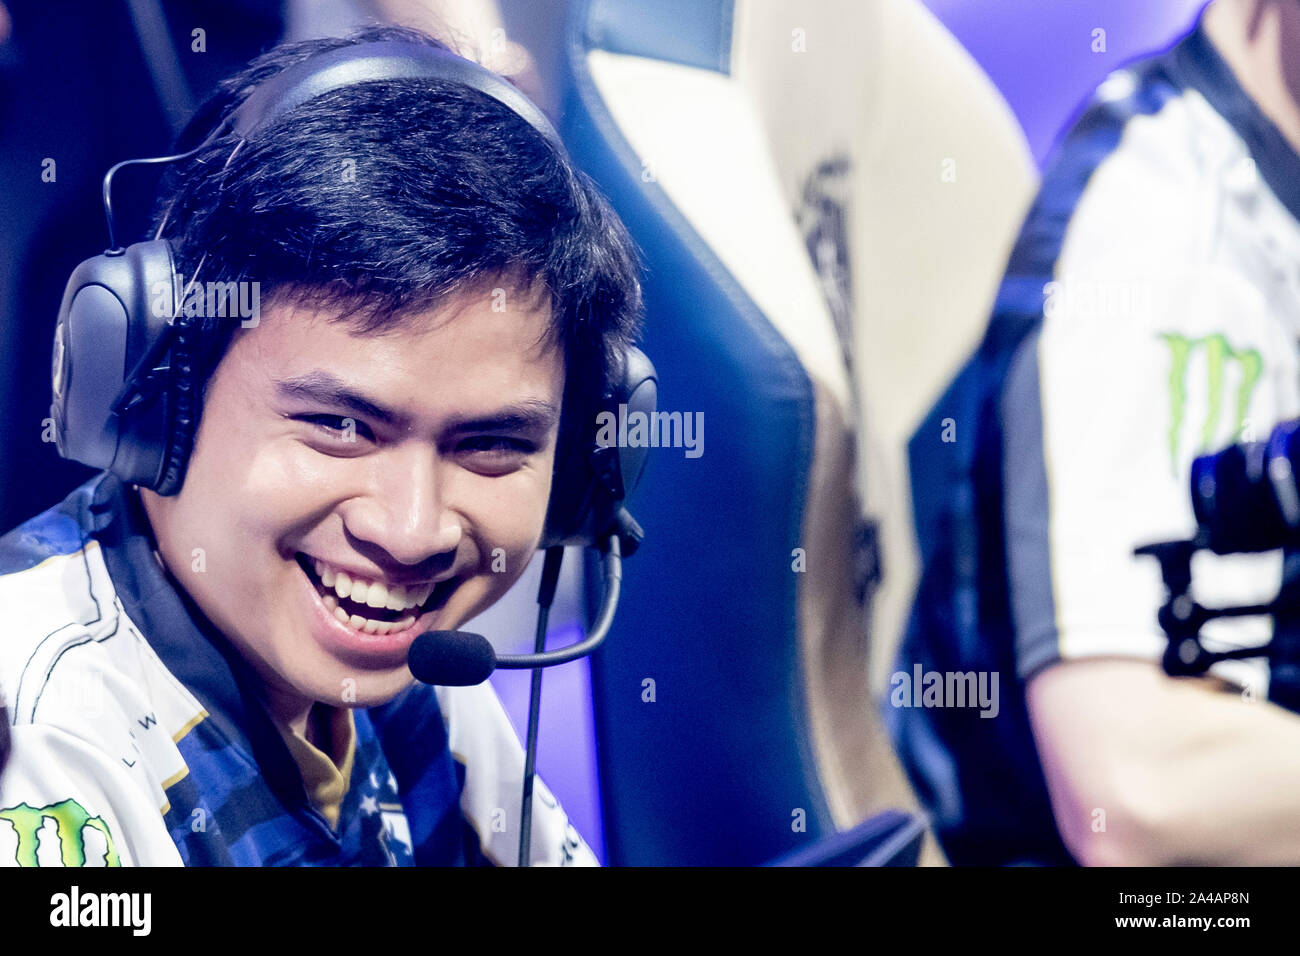 Berlin, Germany. 13th Oct, 2019. Jake 'Xmithie' Puchero, Philippine-US e-athlete at Team Liquid, laughs at the group stage of the League of Legends e-sports world championship at the Verti Music Hall before the start of the match. Credit: Christoph Soeder/dpa/Alamy Live News Stock Photo